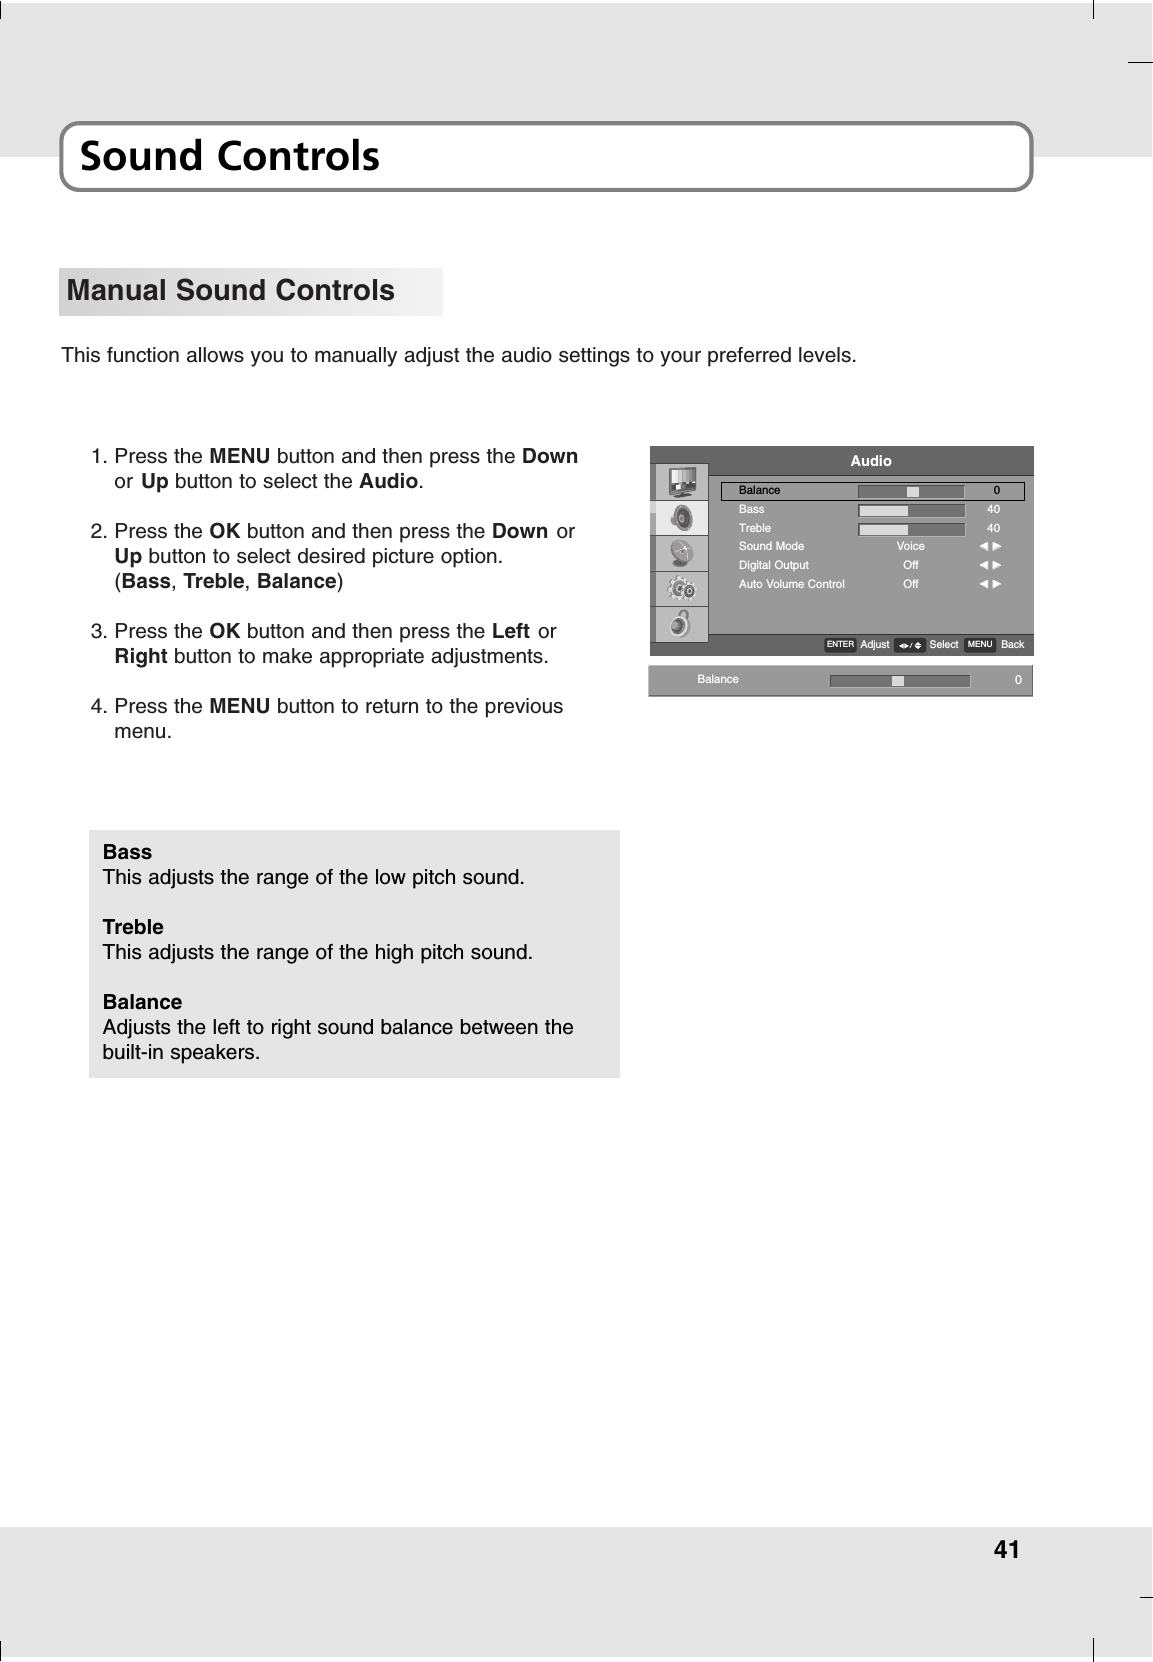 41Sound ControlsManual Sound ControlsThis function allows you to manually adjust the audio settings to your preferred levels.1. Press the MENU button and then press the Downor Up button to select the Audio.2. Press the OK button and then press the Down orUp button to select desired picture option.(Bass, Treble, Balance) 3. Press the OK button and then press the Left orRight button to make appropriate adjustments.4. Press the MENU button to return to the previousmenu.BassThis adjusts the range of the low pitch sound.TrebleThis adjusts the range of the high pitch sound.BalanceAdjusts the left to right sound balance between thebuilt-in speakers.Balance 0AudioBalanceBassTrebleSound ModeDigital OutputAuto Volume ControlVoiceOffOff04040FF  GGFF  GGFF  GGENTERAdjust MENU BackSelect